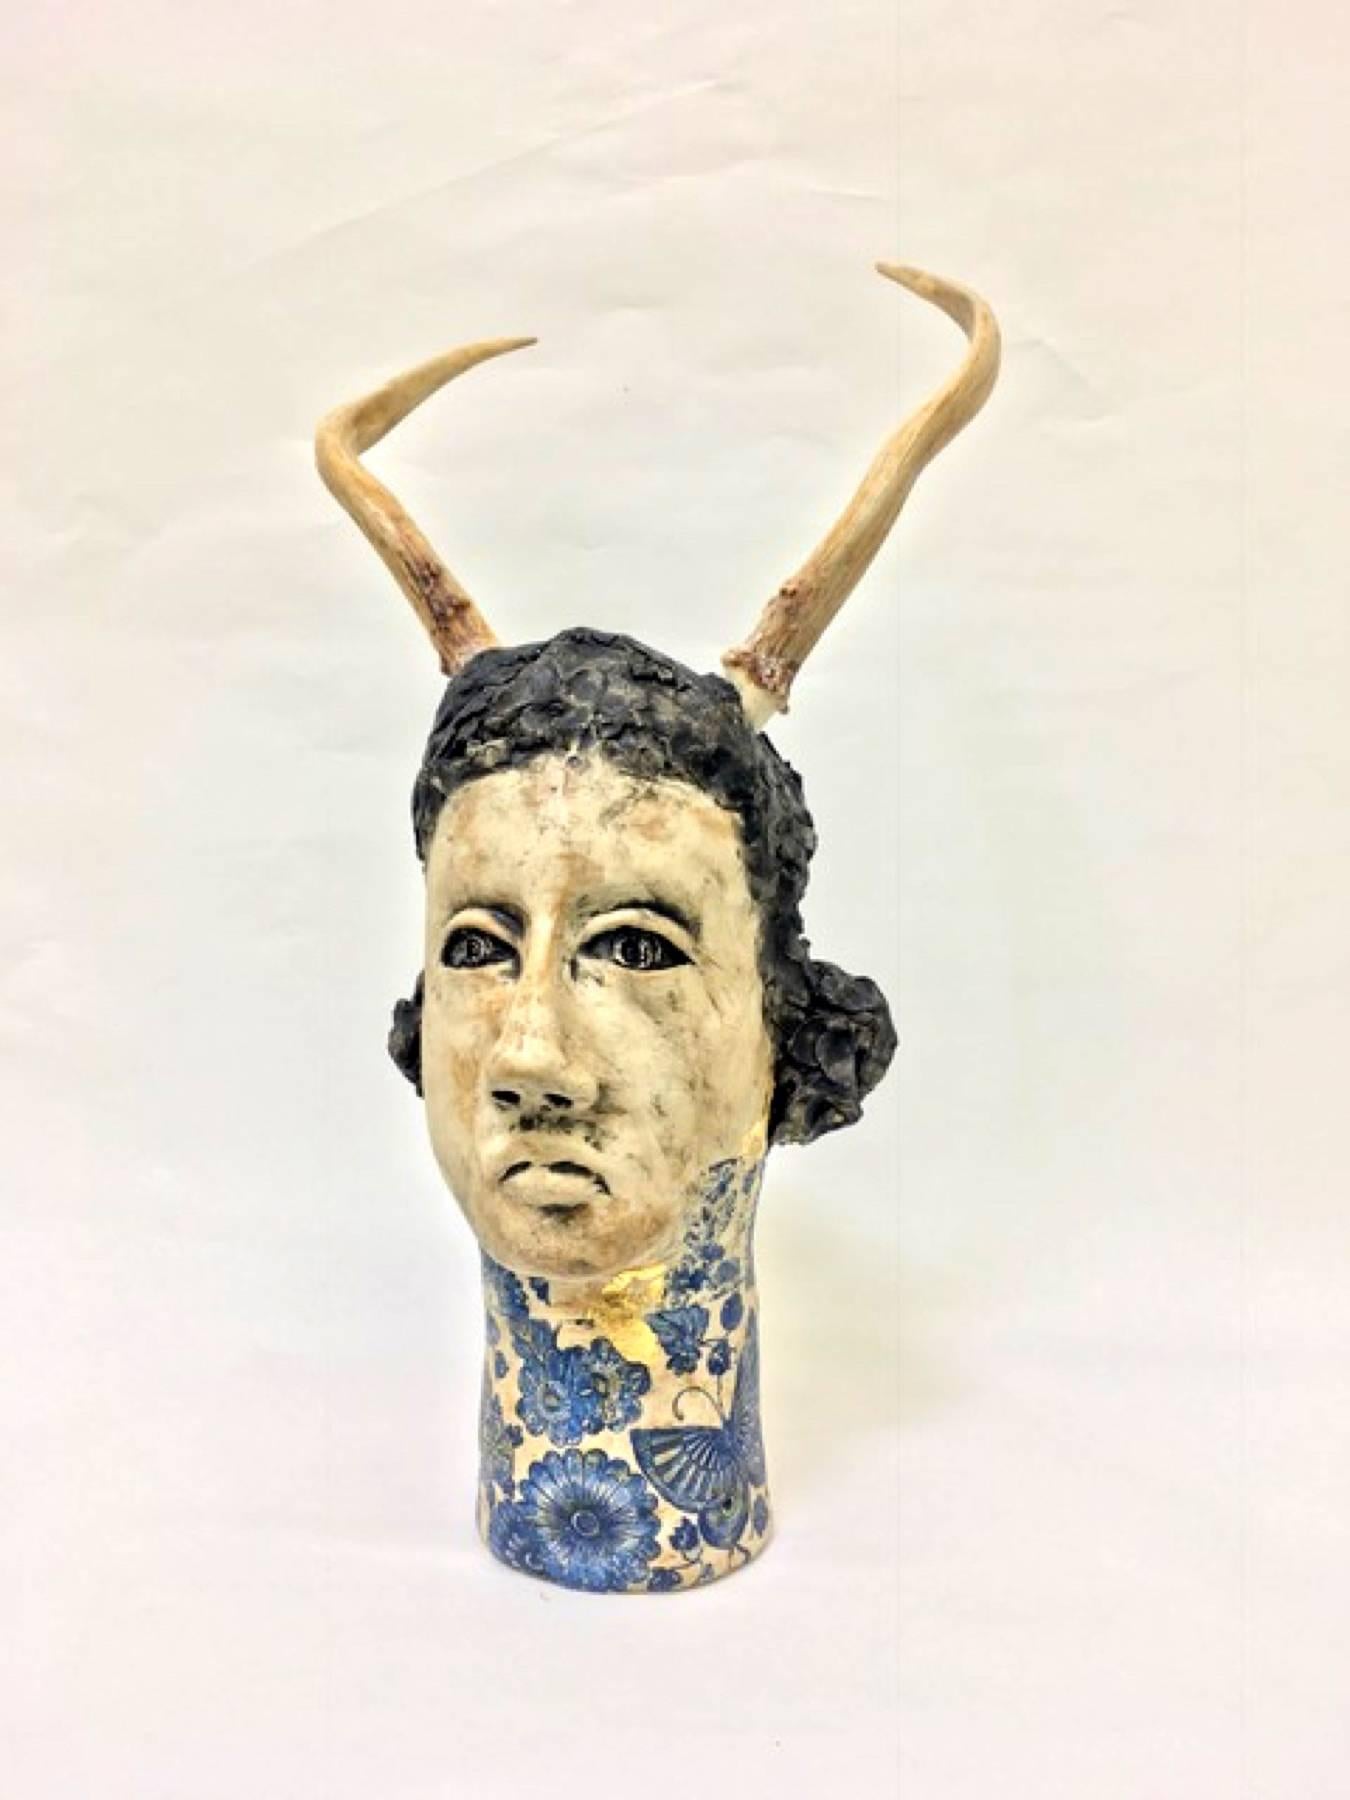 Ashley Benton Figurative Sculpture - Ceramic Sculpture; 'Her Name May Have Been Ruth'